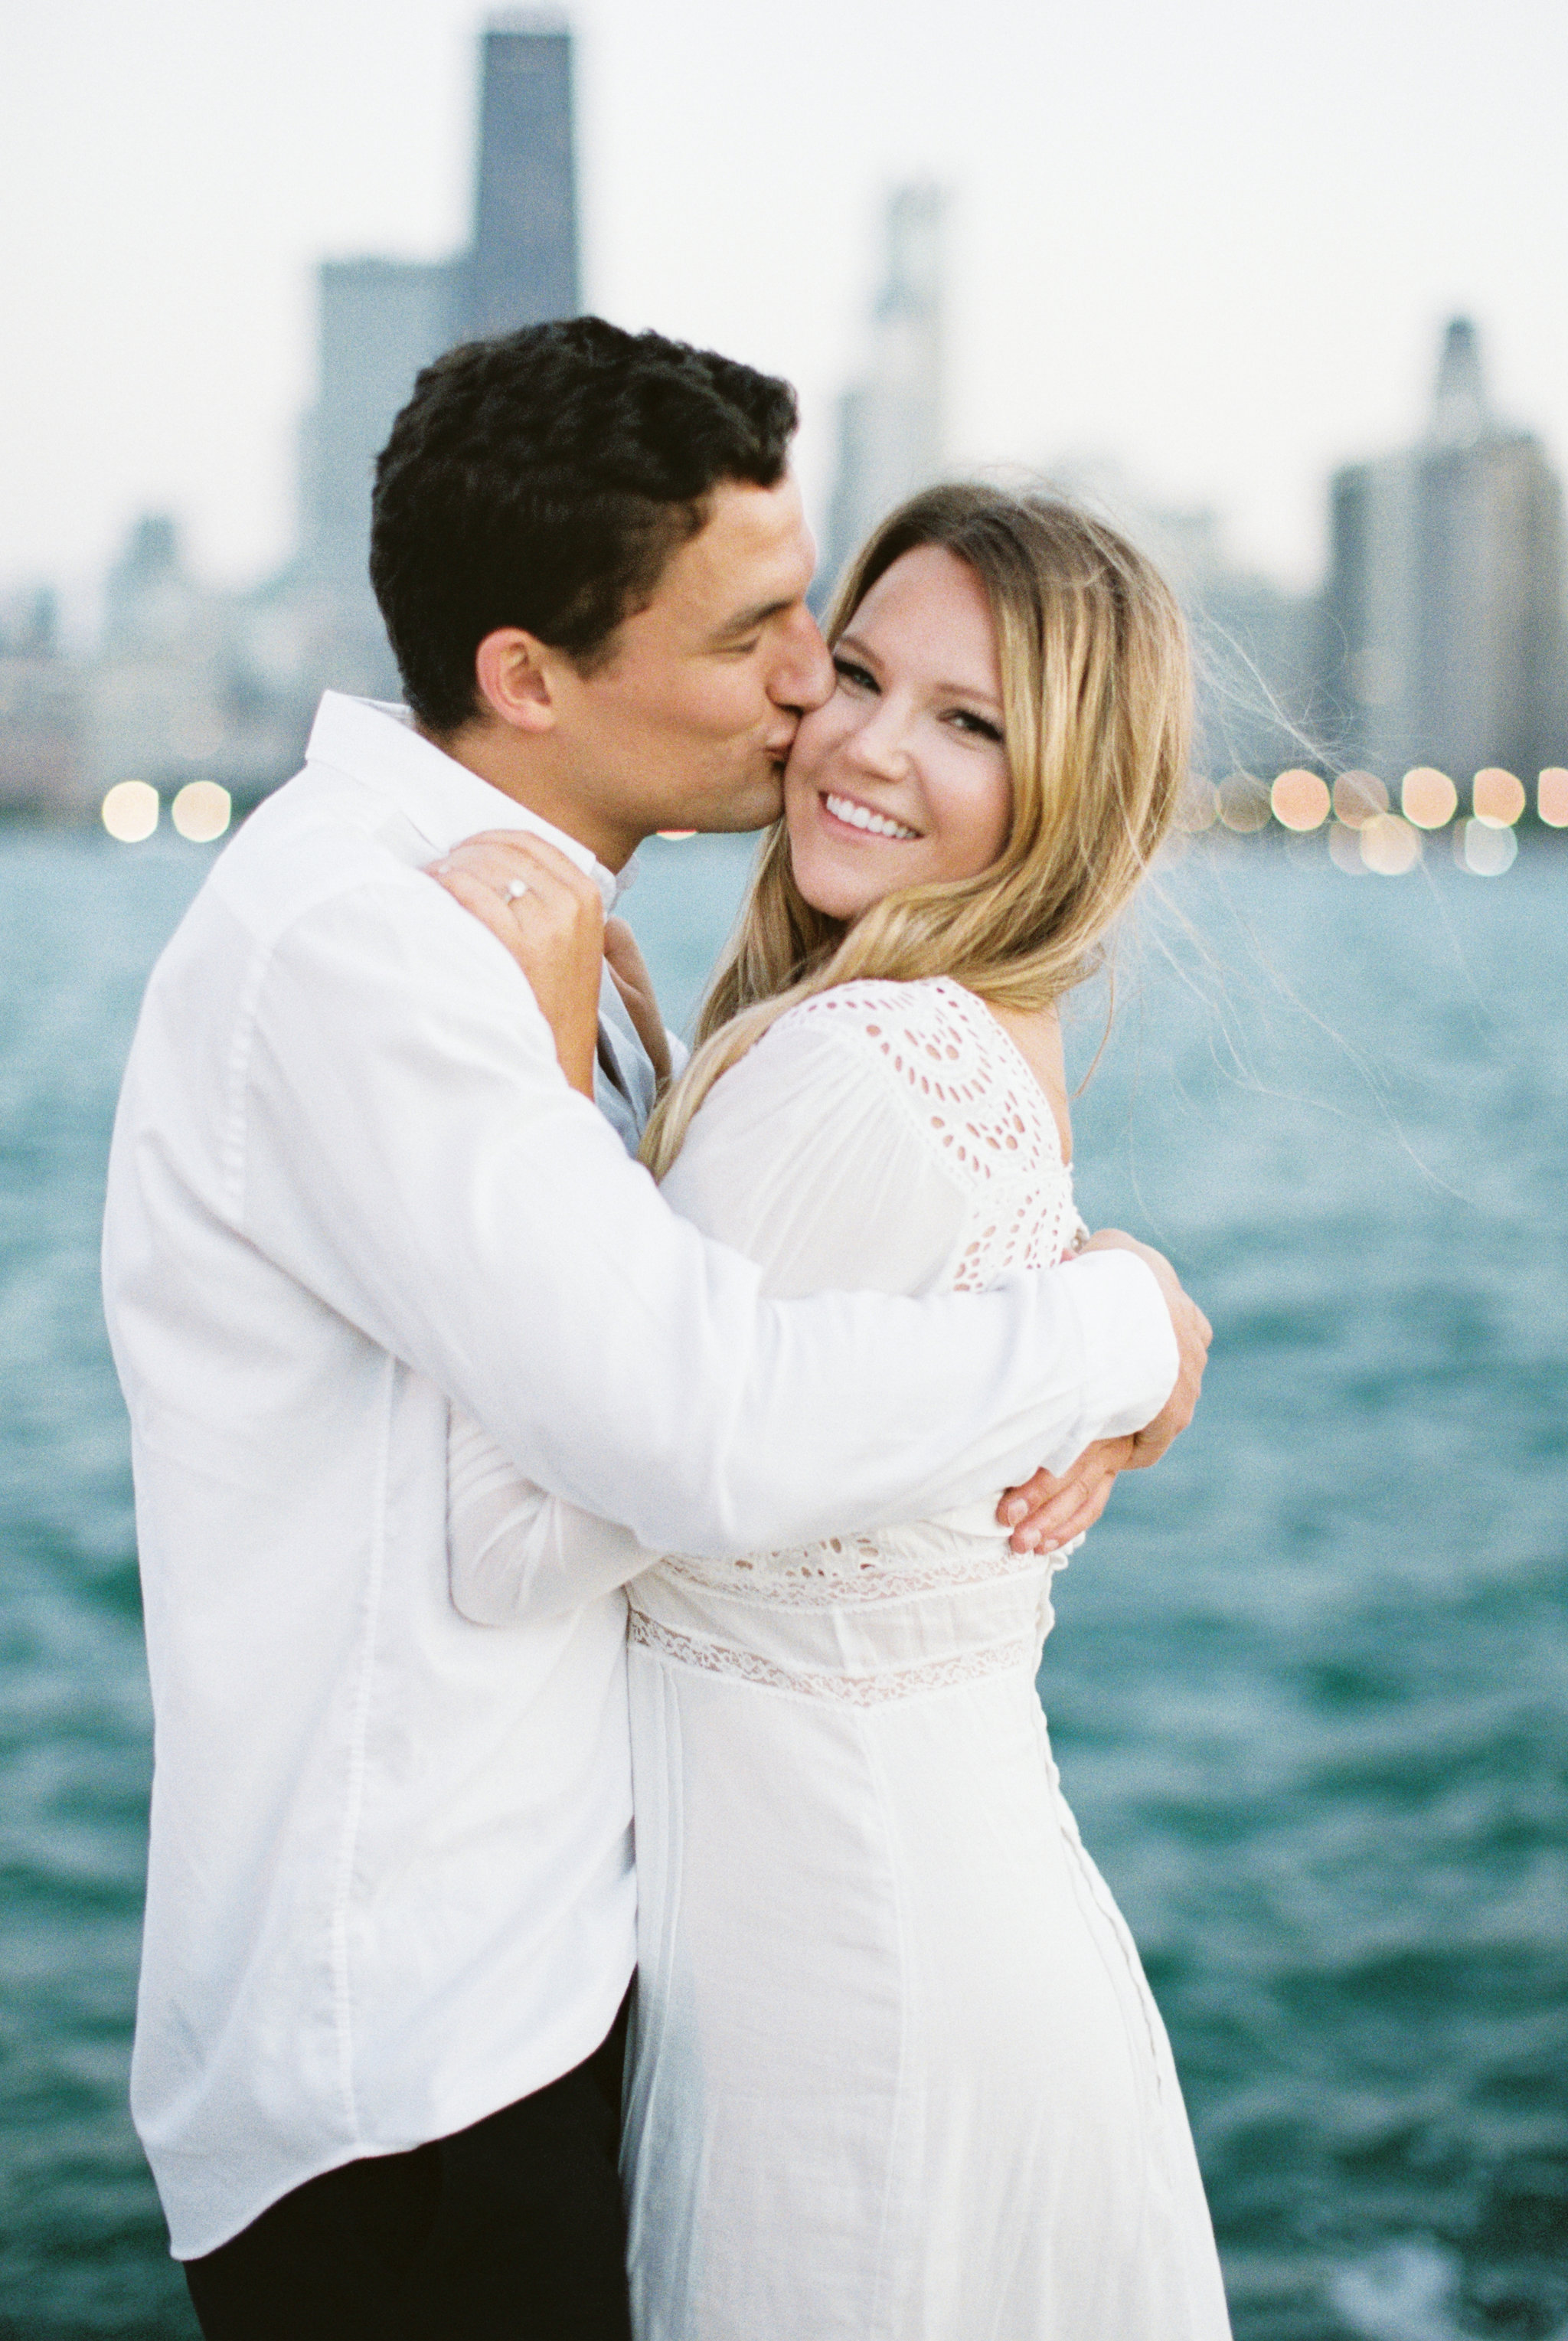 Romantic North Avenue Beach Chicago engagement session captured by Kendra Denault Photography. See more engagement photo ideas on CHItheeWED.com!